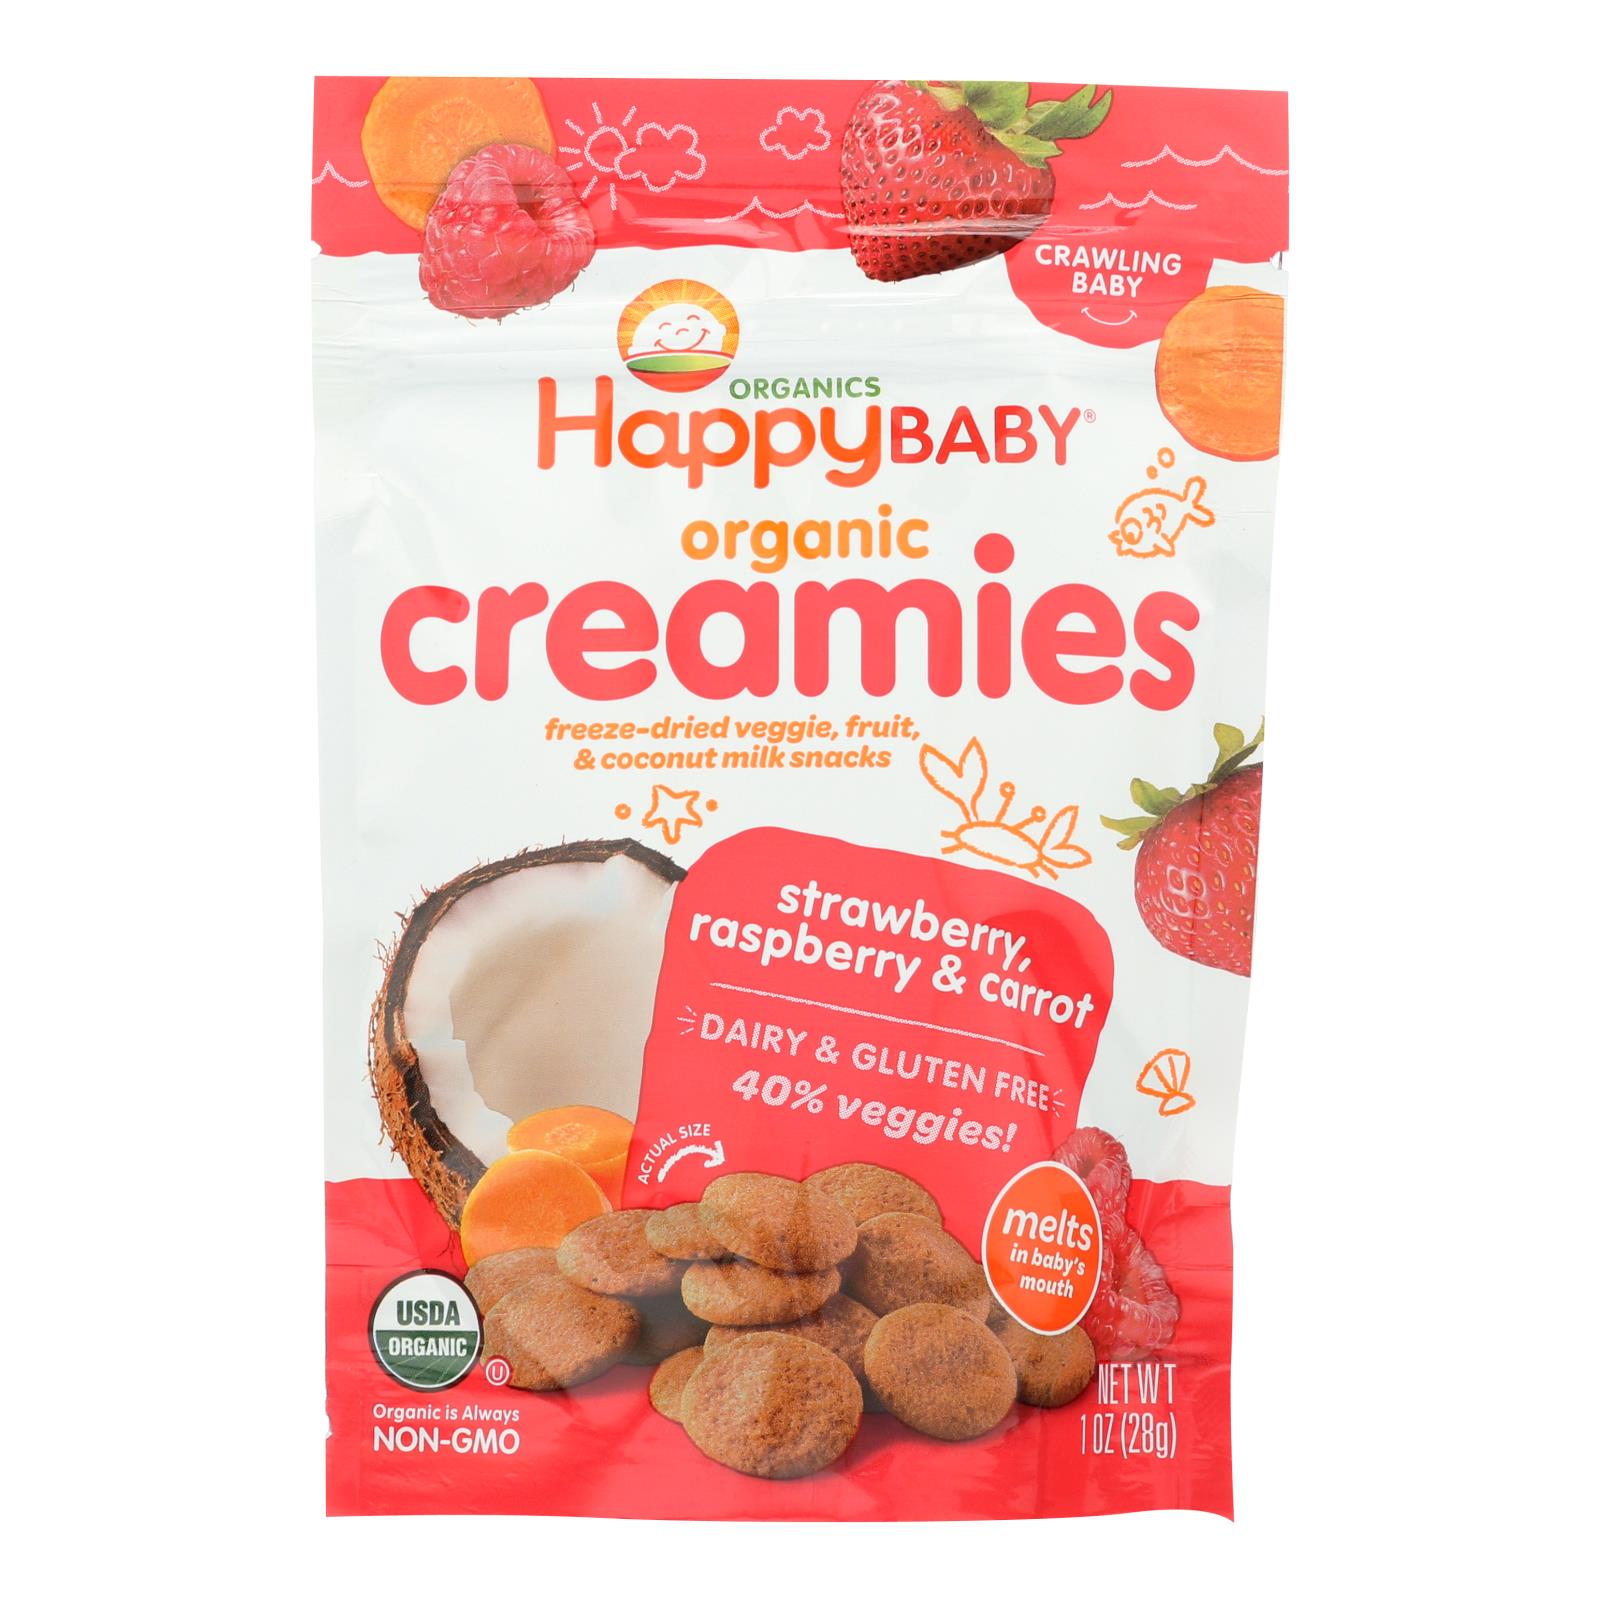 Happy Creamies Organic Snacks - Strawberry And Raspberry - Case Of 8 - 1 Oz - Whole Green Foods